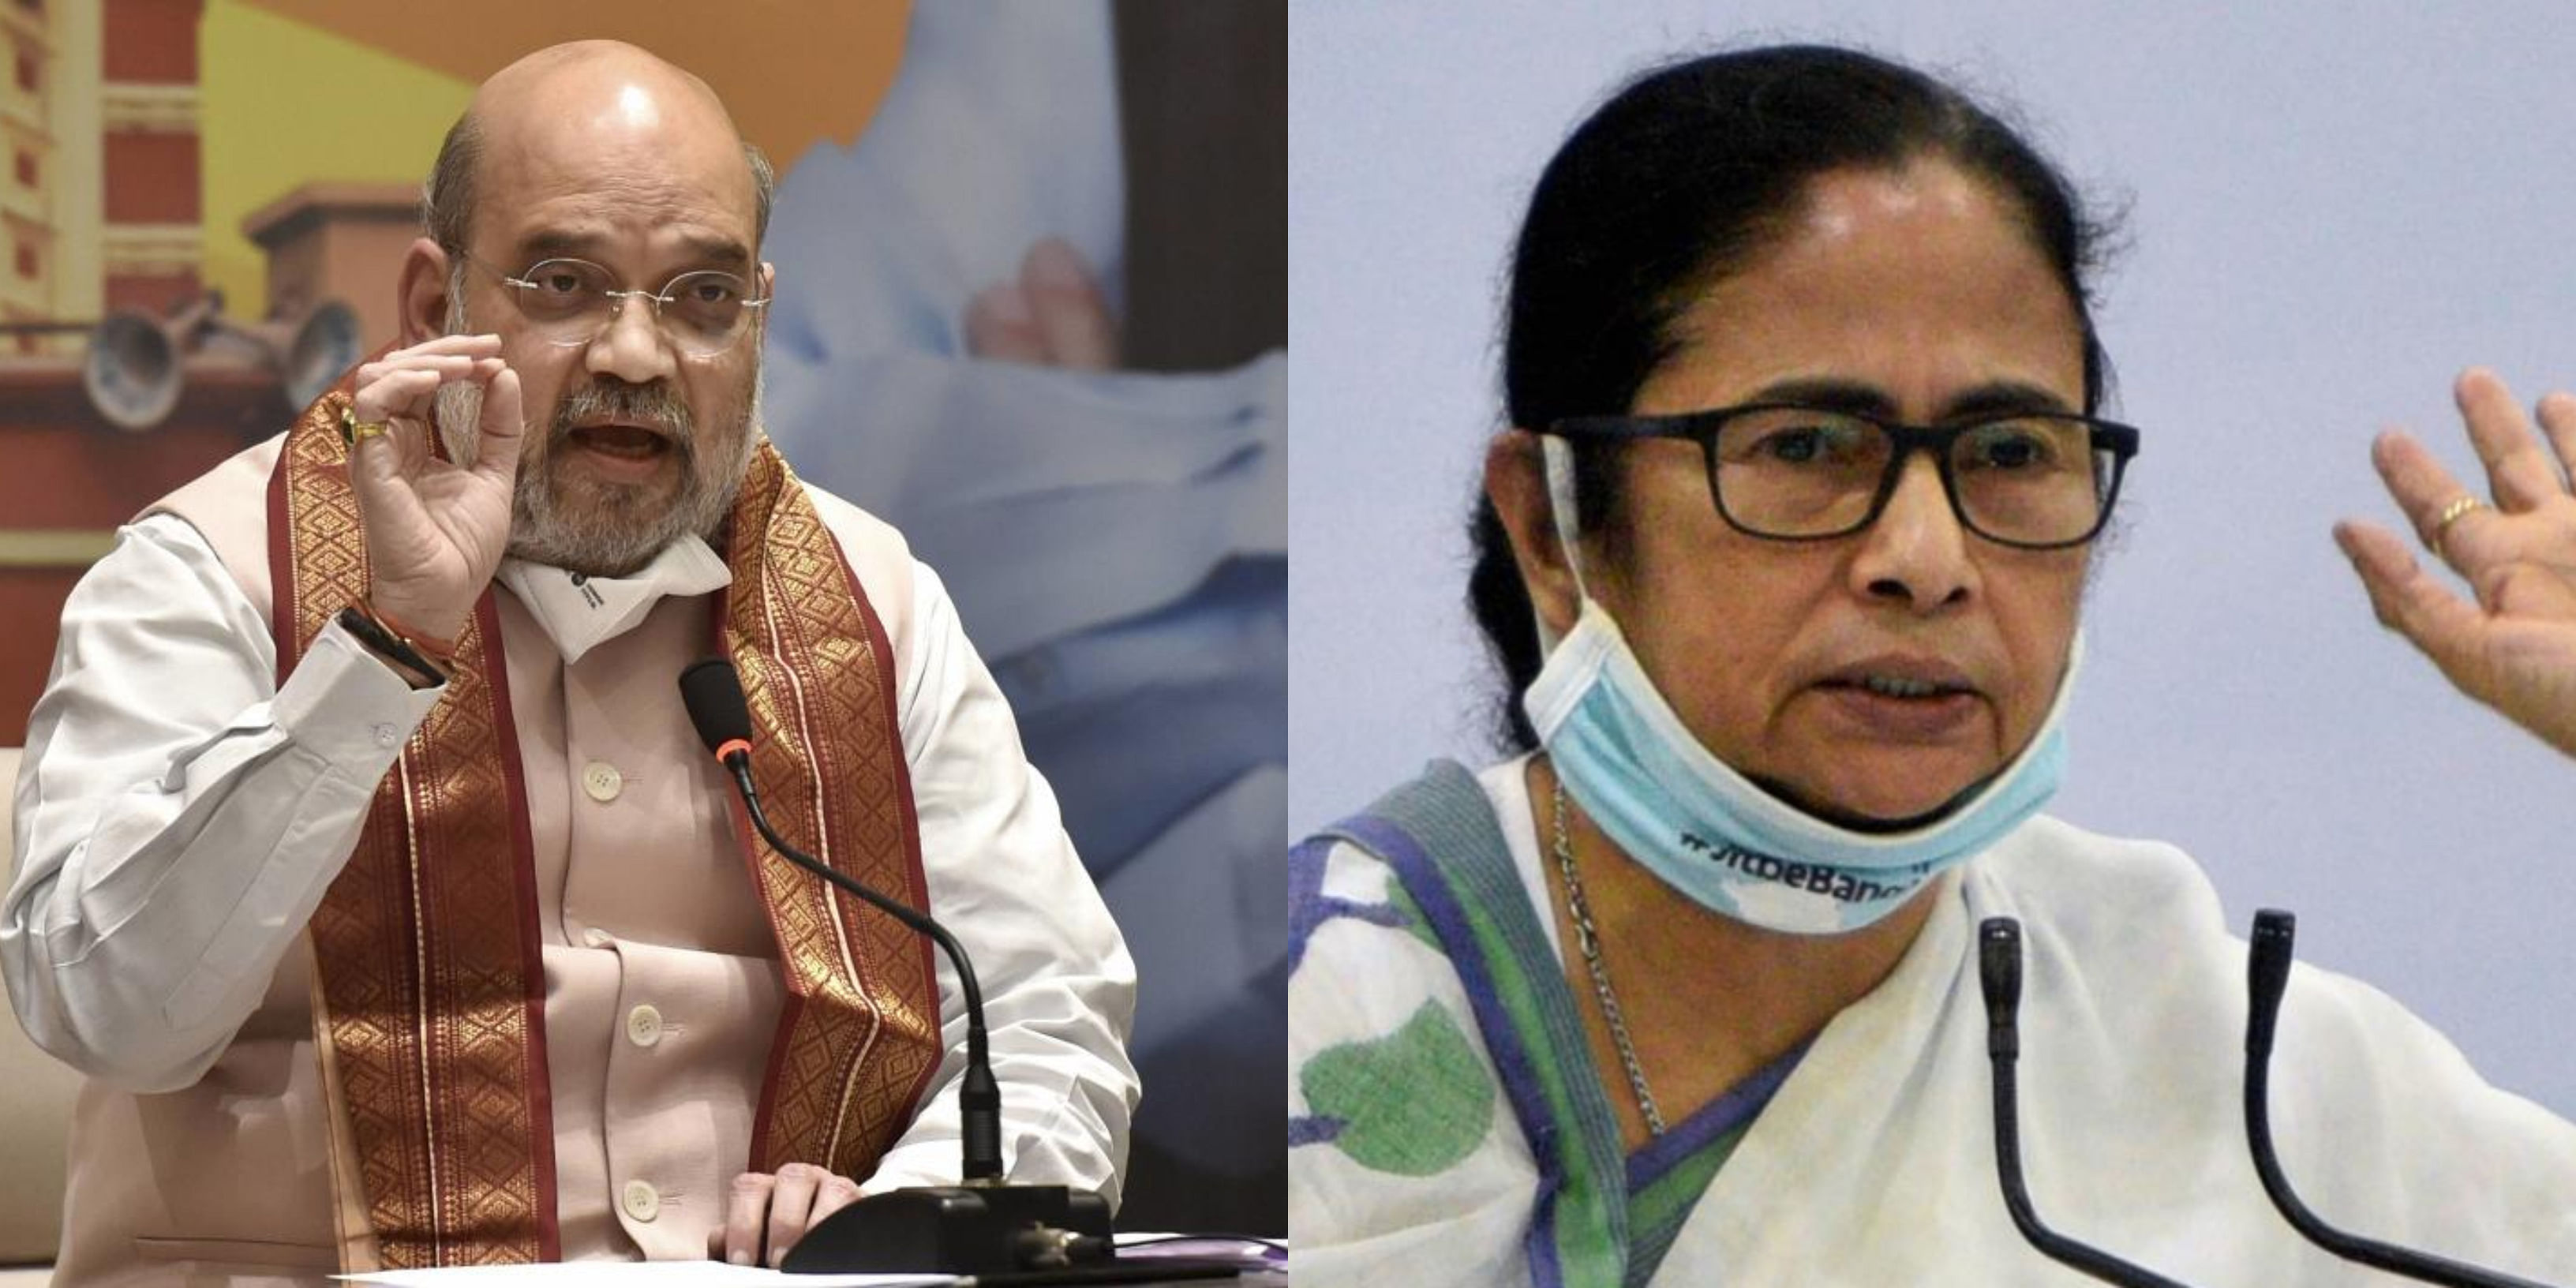 Union Home Minister Amit Shah (L) and Chief Minister Mamata Banerjee (R). Credit: PTI